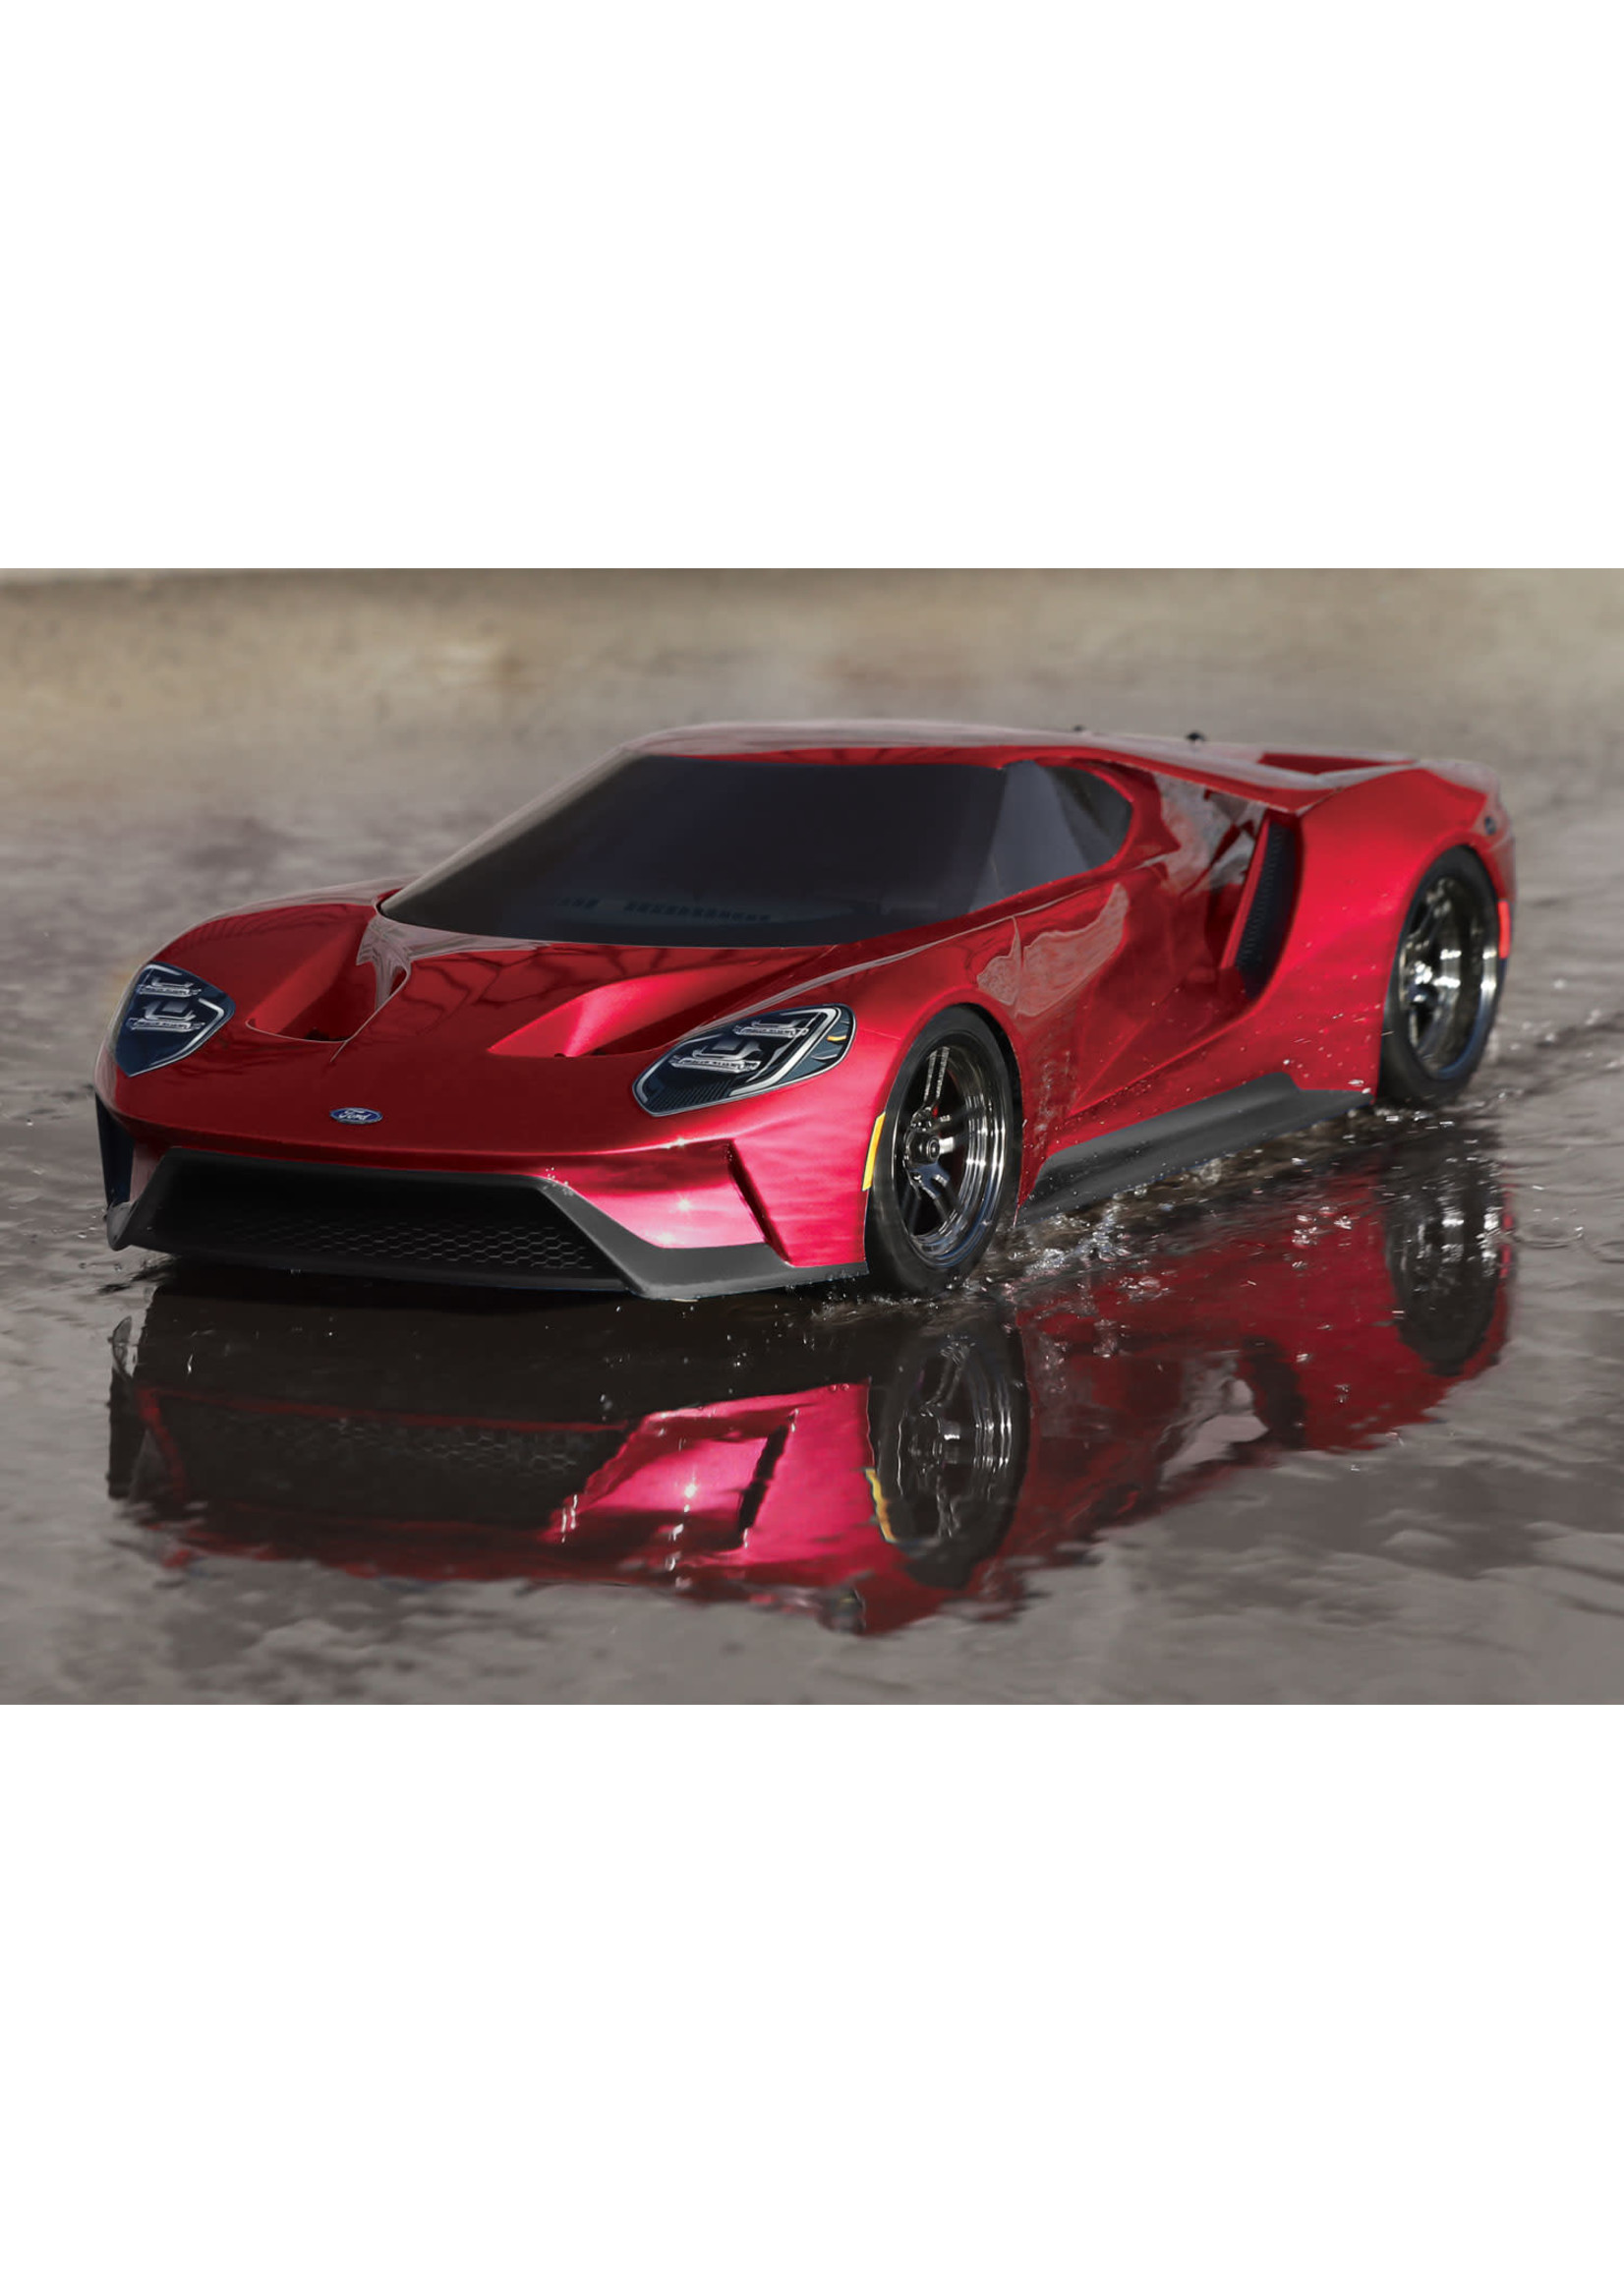 Traxxas TRA83056-4 Traxxas Ford GT: 1/10 Scale AWD Supercar with TQi Traxxas Link Enabled 2.4Ghz Radio System & Traxxas Stability Management (TSM)